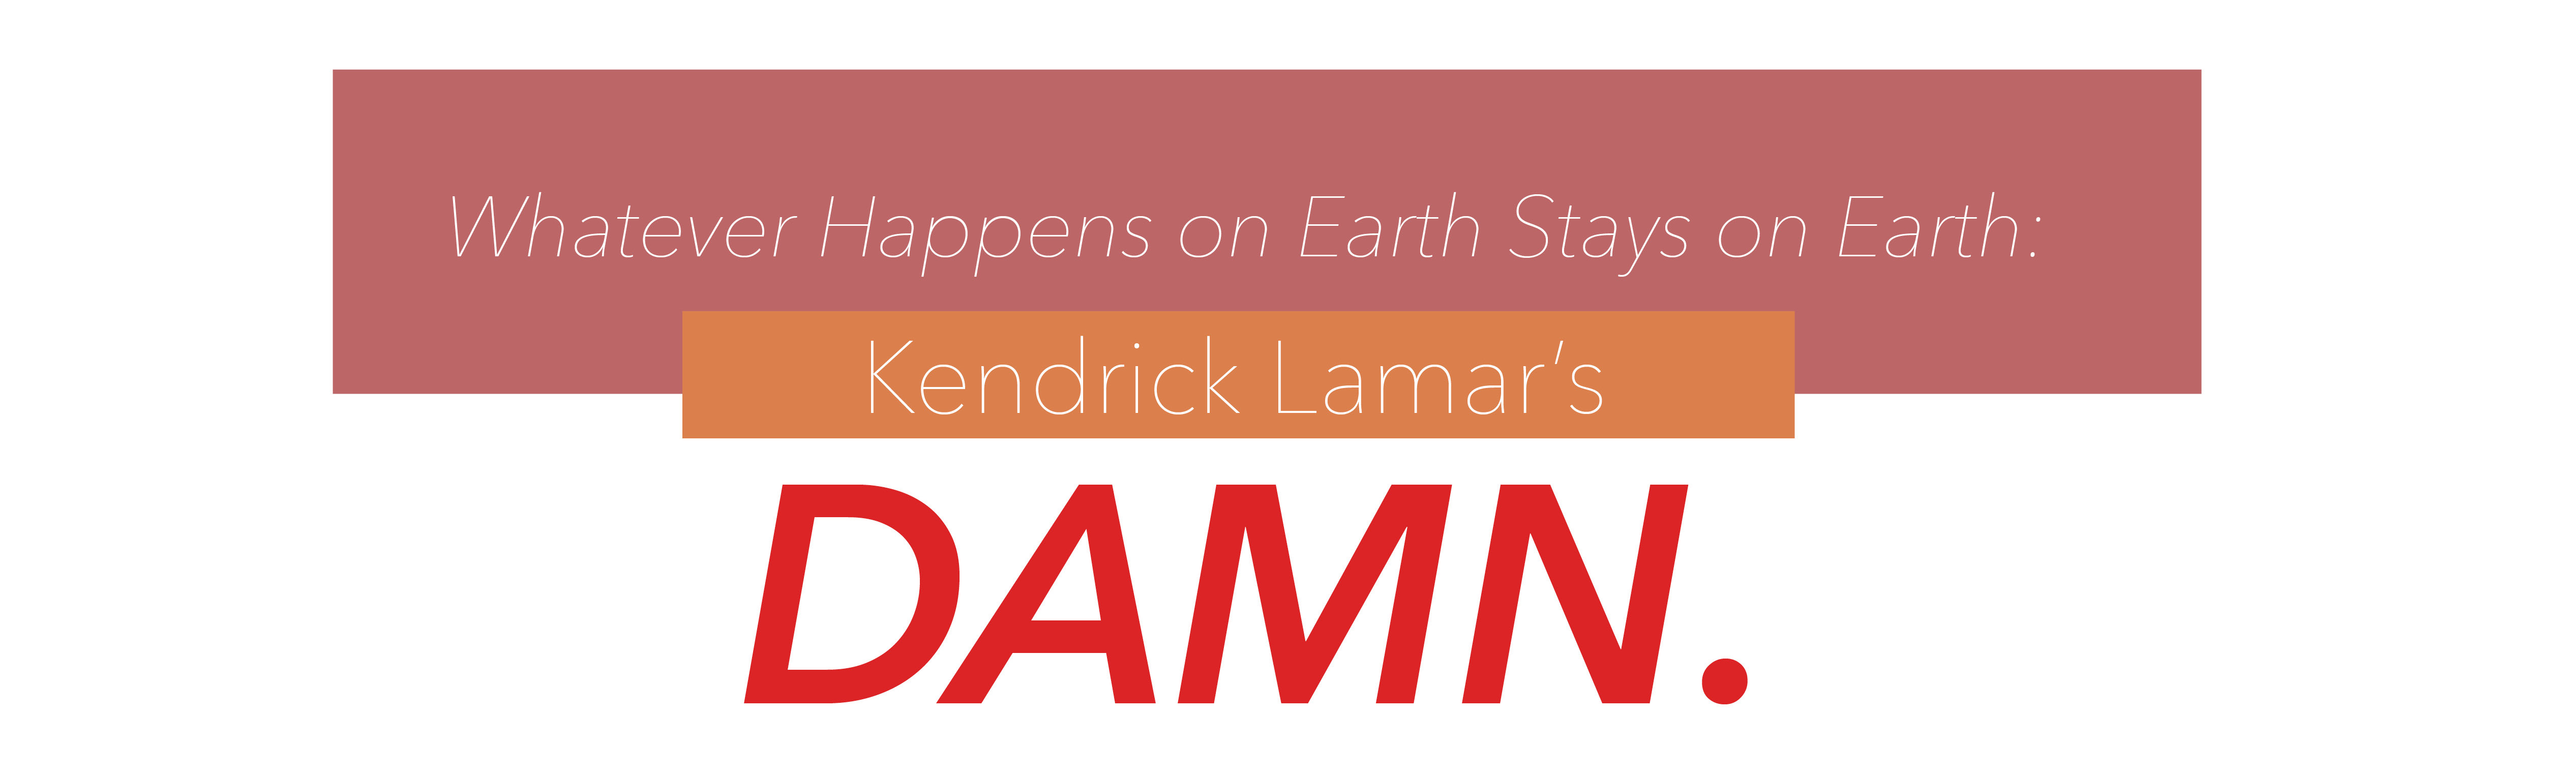 Whatever Happens on Earth Stays on Earth: Kendrick Lamar's “DAMN.” Album  Review